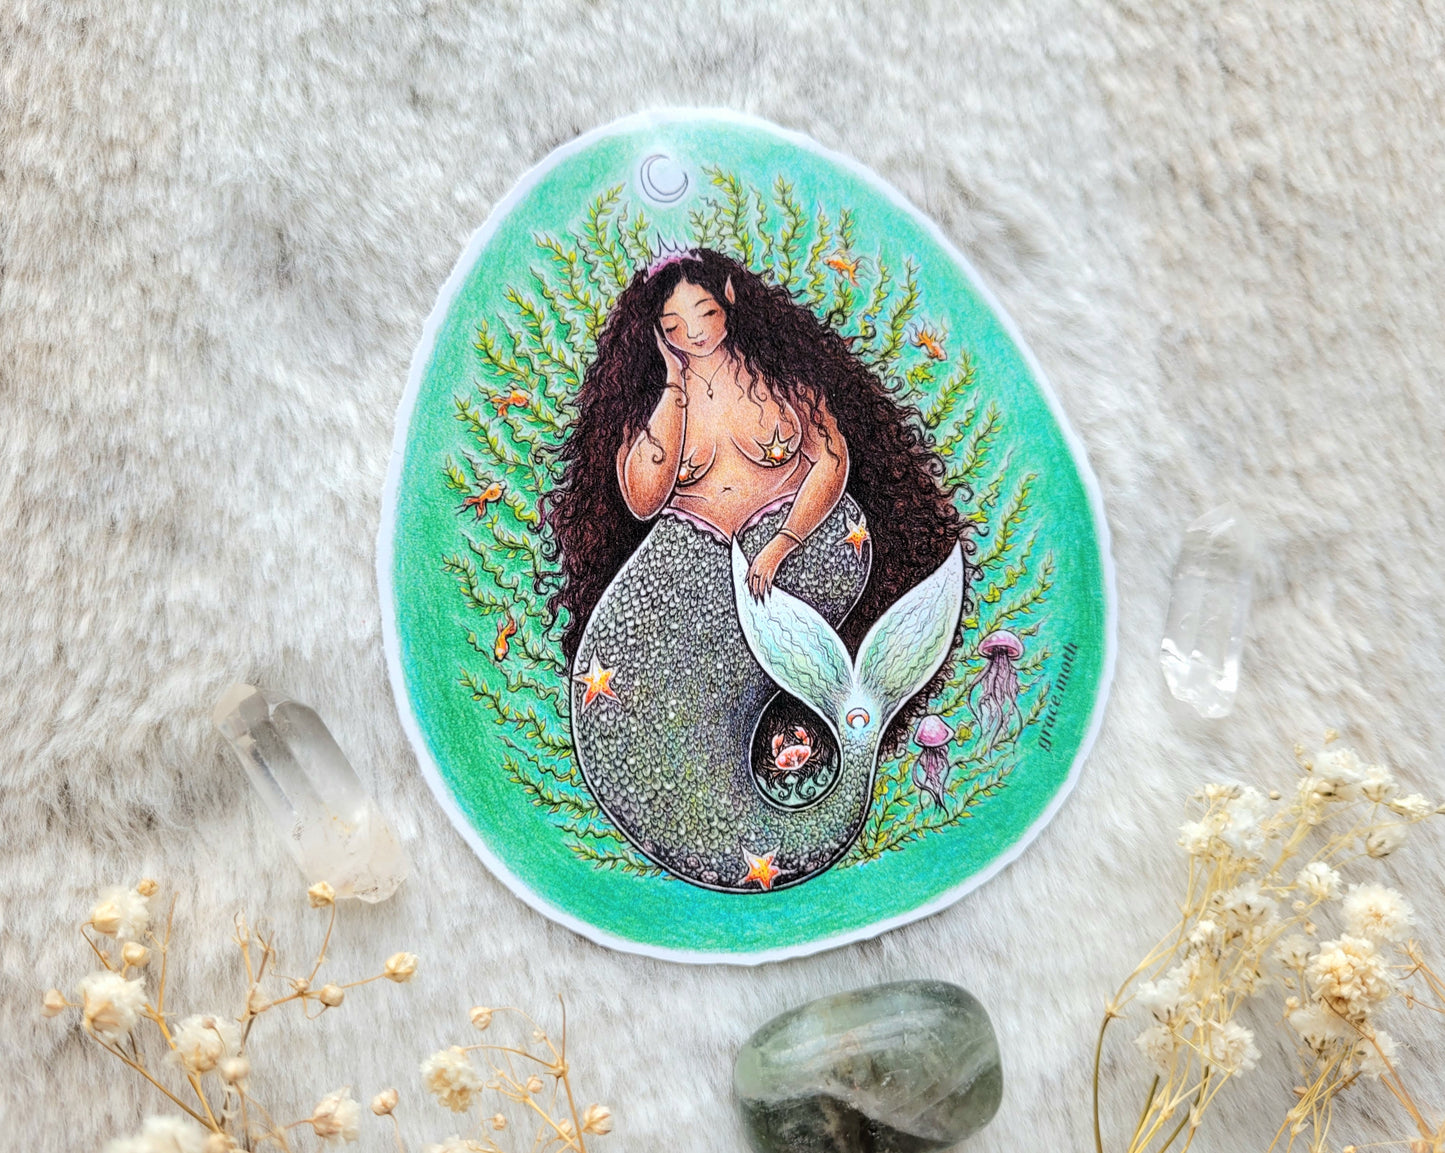 Magical Mermaid - Vinyl Sticker 10cm - Illustrated by Grace moth. Witchy, cottagecore, fantasy, folklore, fairy